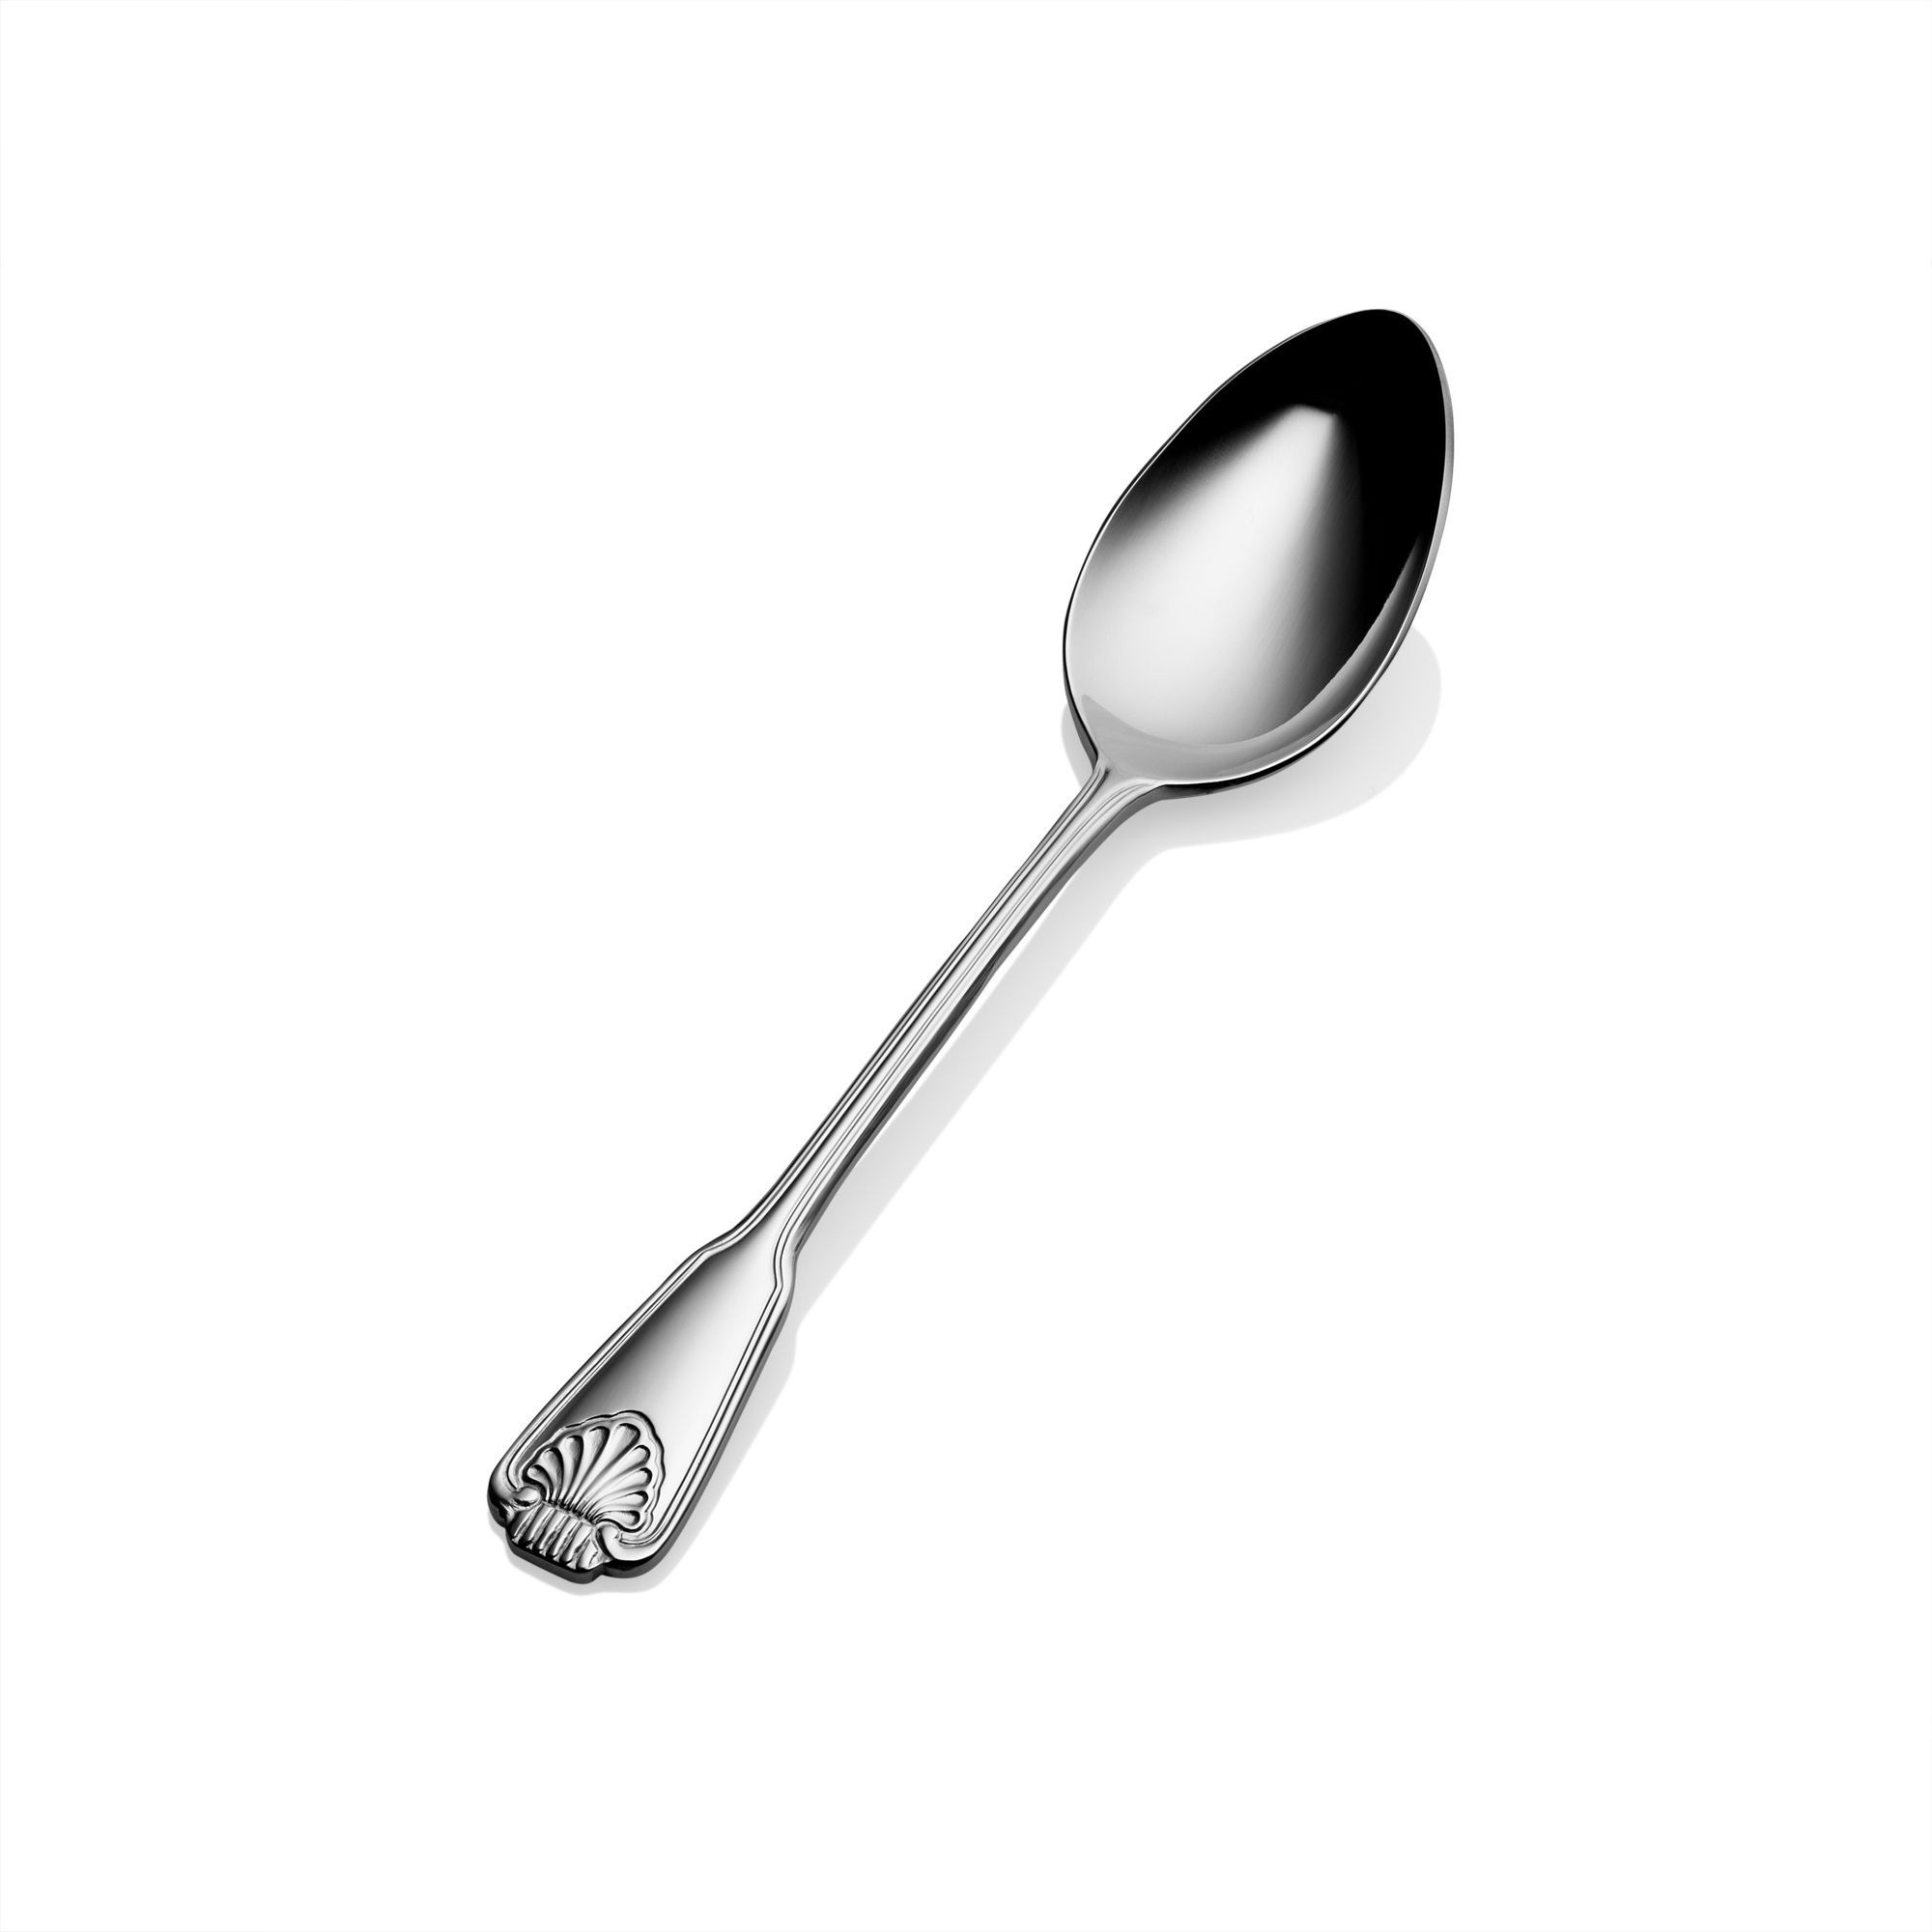 Bon Chef S2003S Shell 18/8 Stainless Steel Silverplated Soup and Dessert Spoon